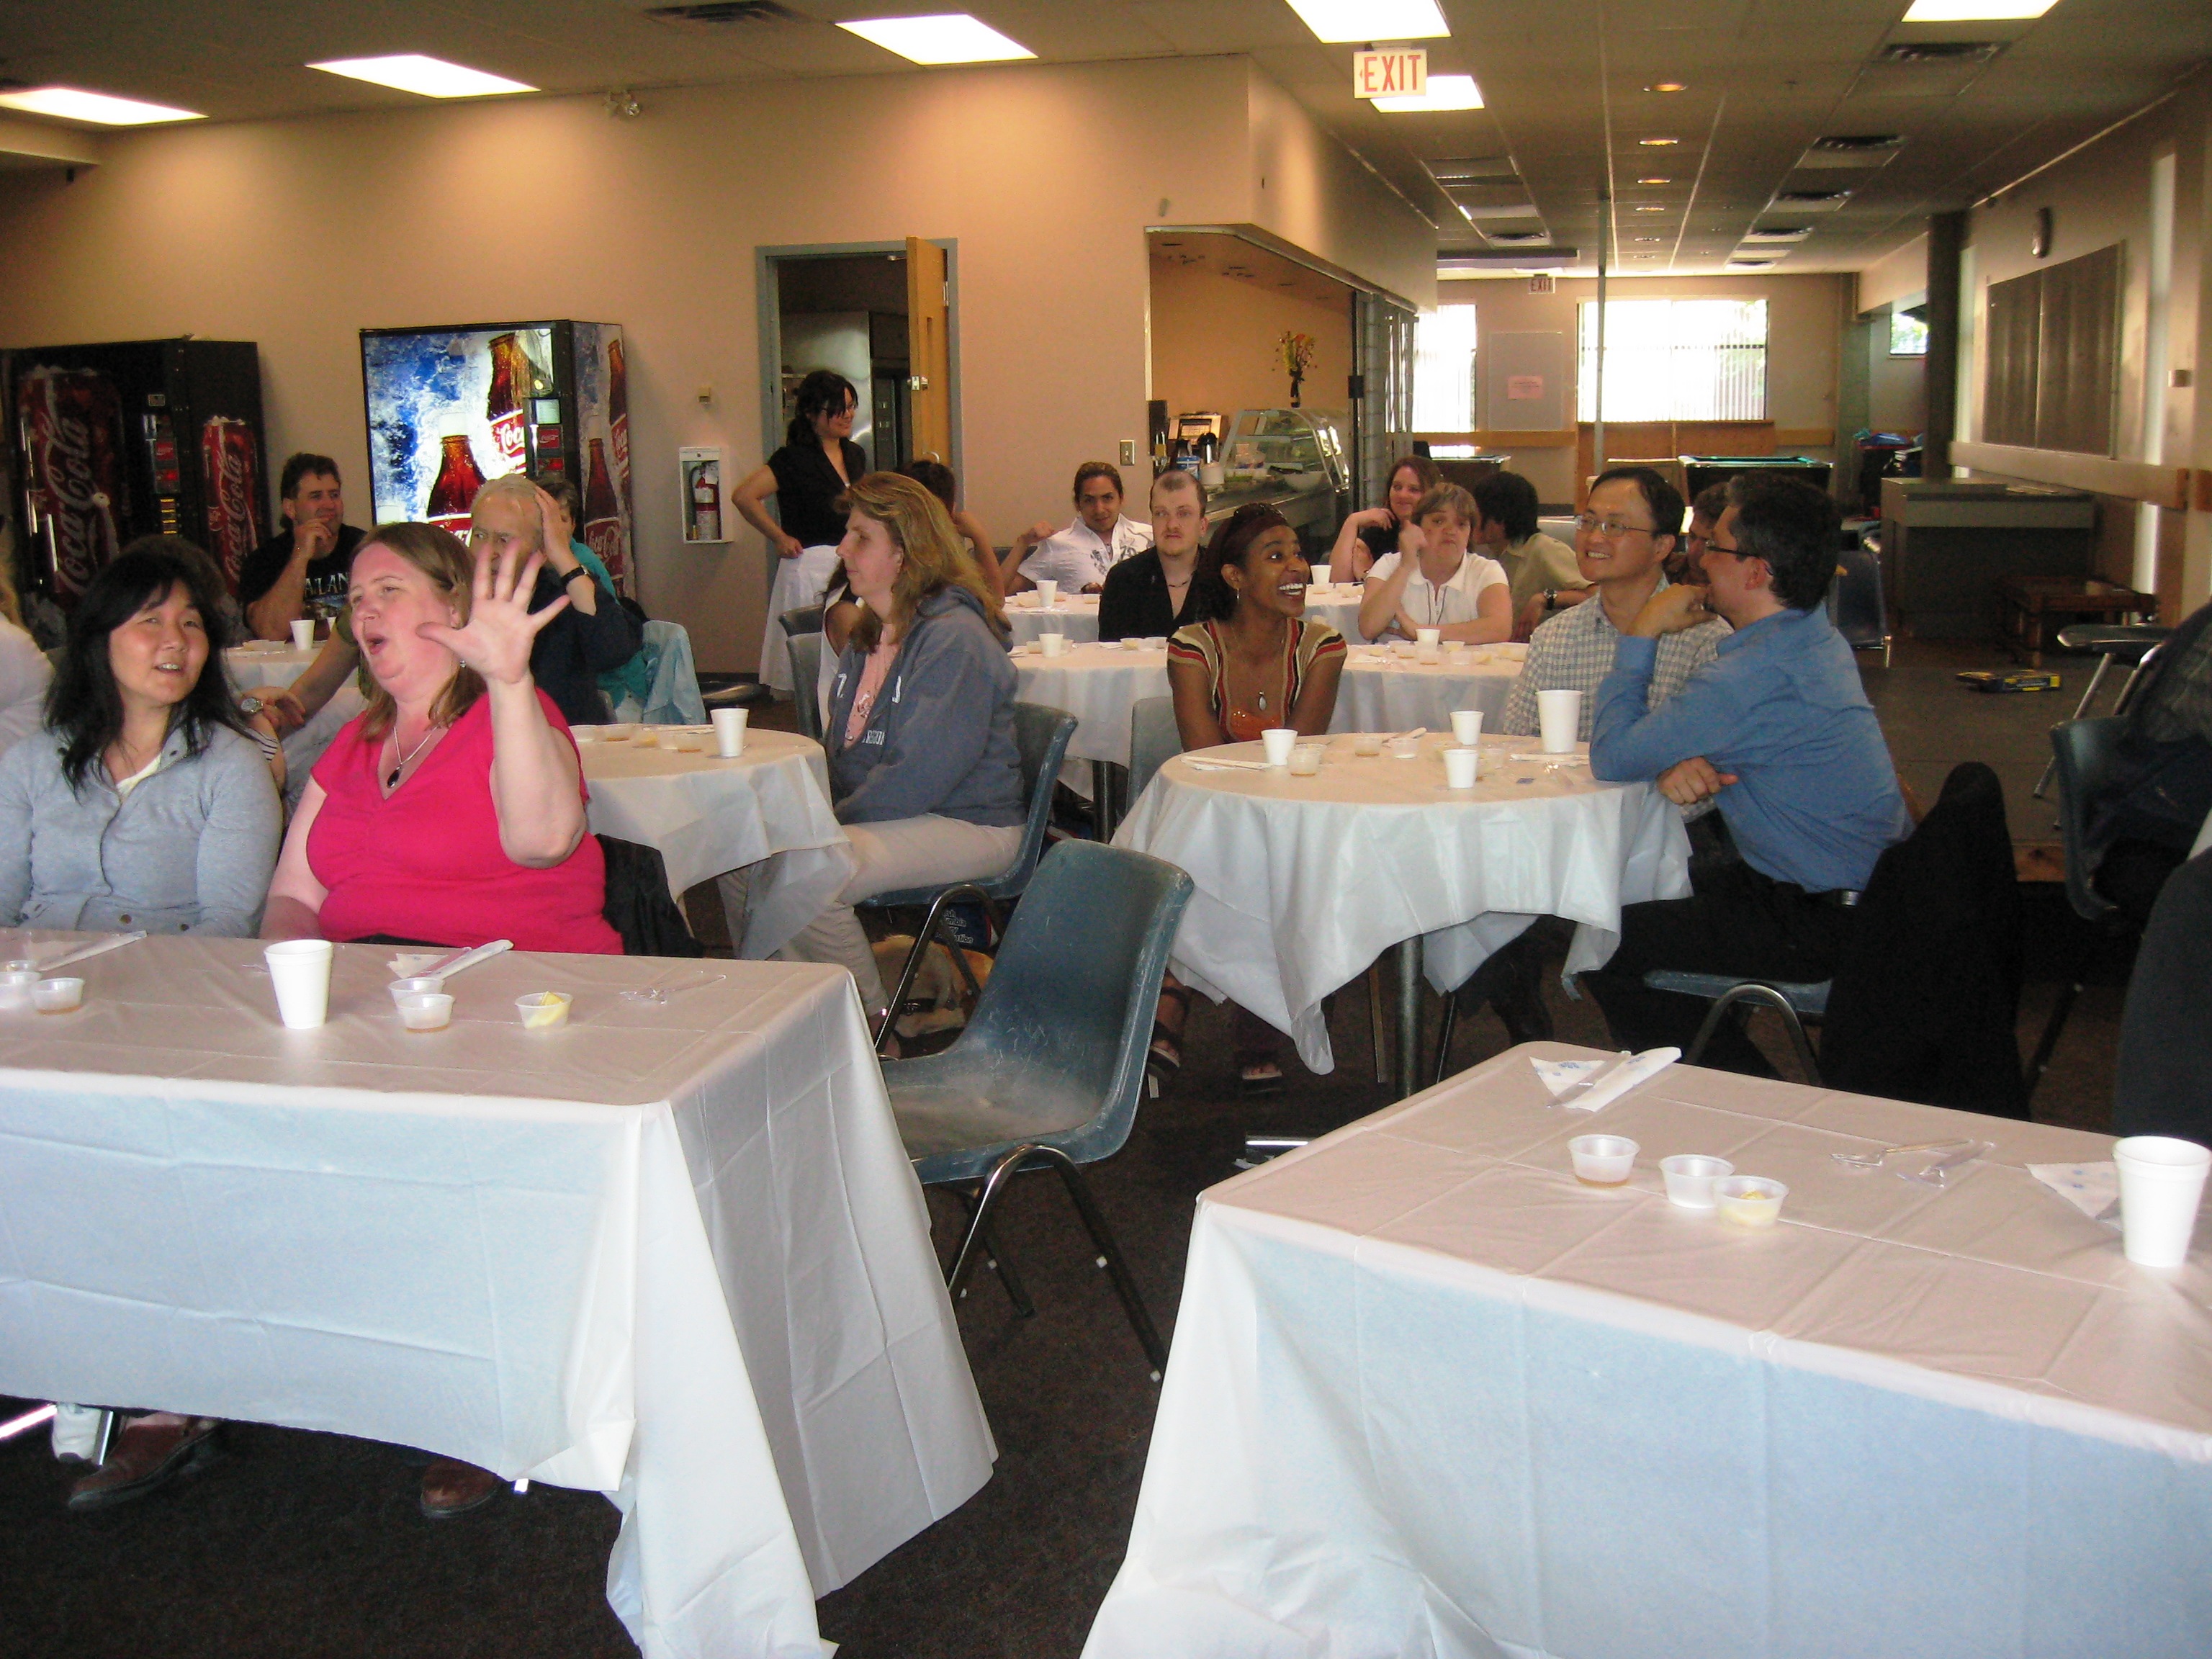 Guests seated for the workshop